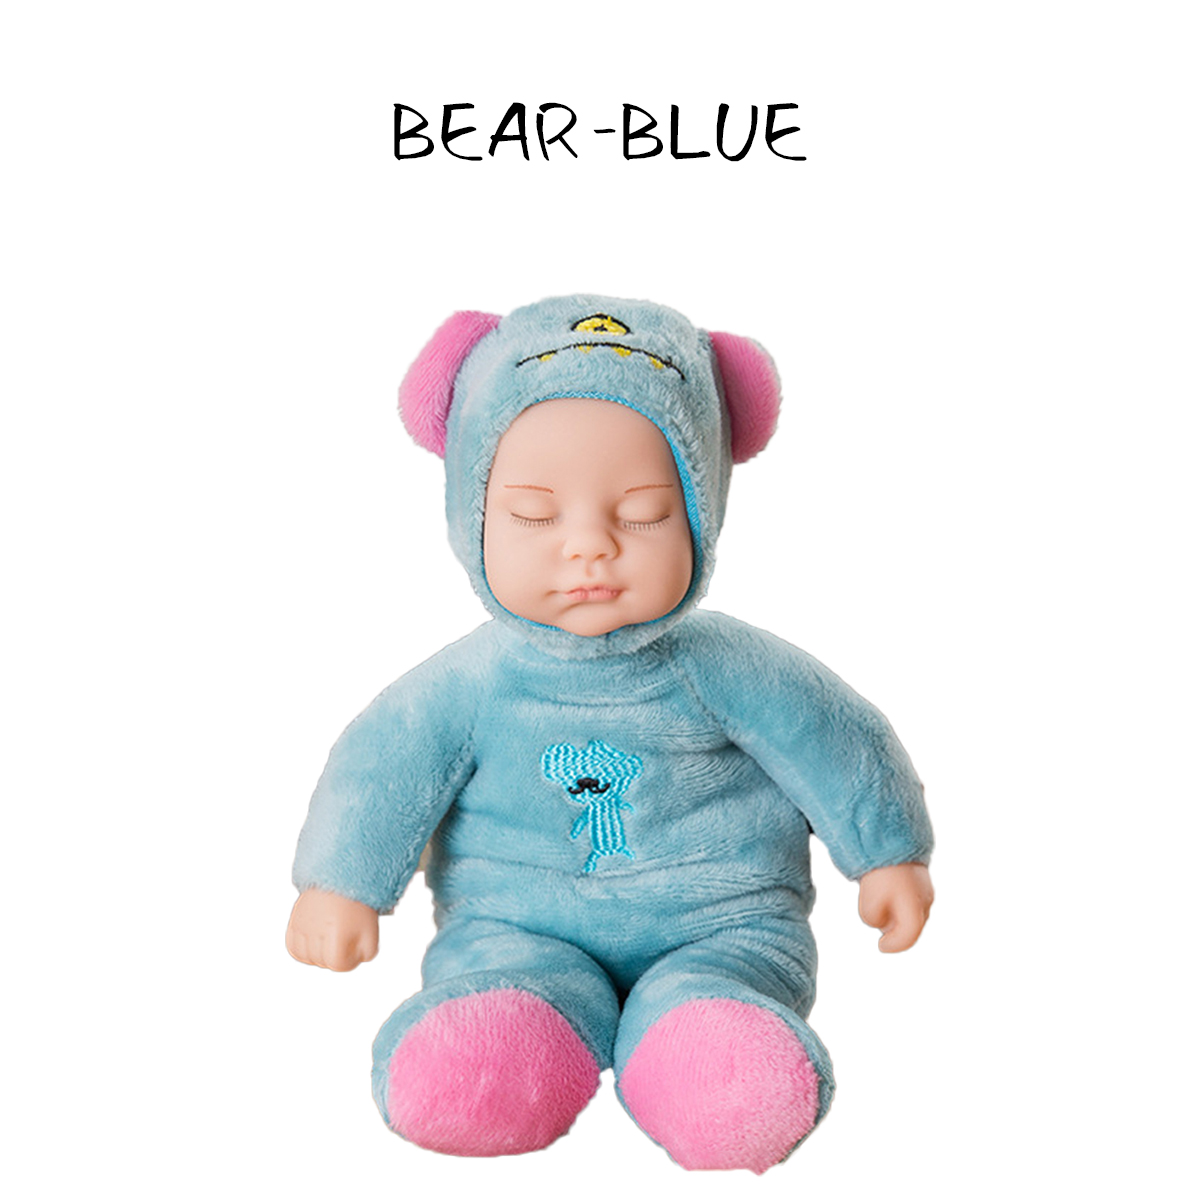 23CM-Soft-Silicone-Vinyl-Lifelike-Realistic-Reborn-Cute-Bear-Rabbit-Doll-Toy-with-Clothes-1722622-4